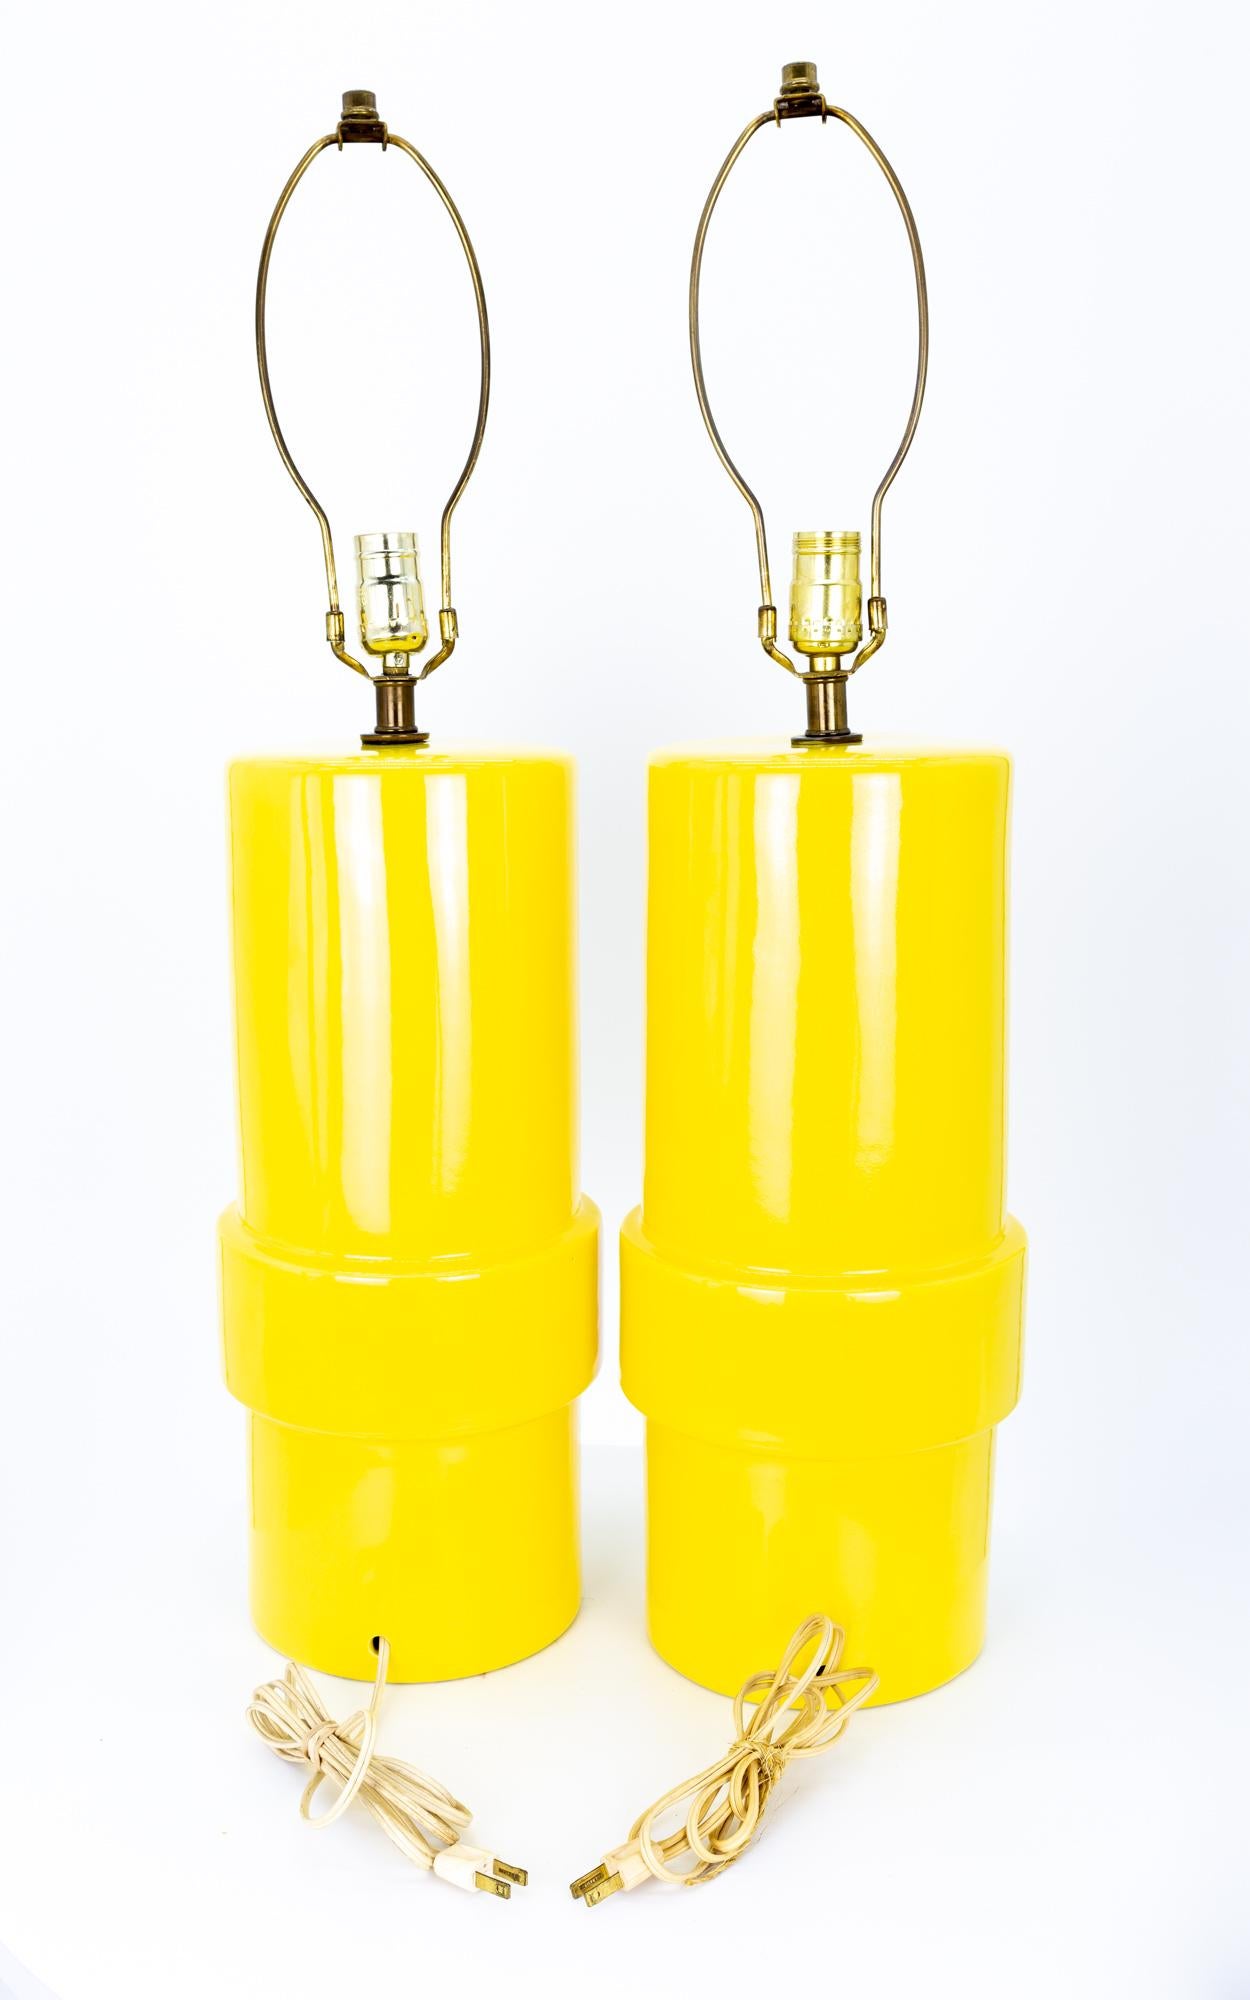 Italian Mid Century Yellow Pottery Table Lamps - A Pair
Each lamp measures 7 wide x 7 deep x 30 inches high and weighs 6.5 pounds

This Lamp is in Excellent Vintage Condition.

Each piece is carefully cleaned and packaged before being shipped